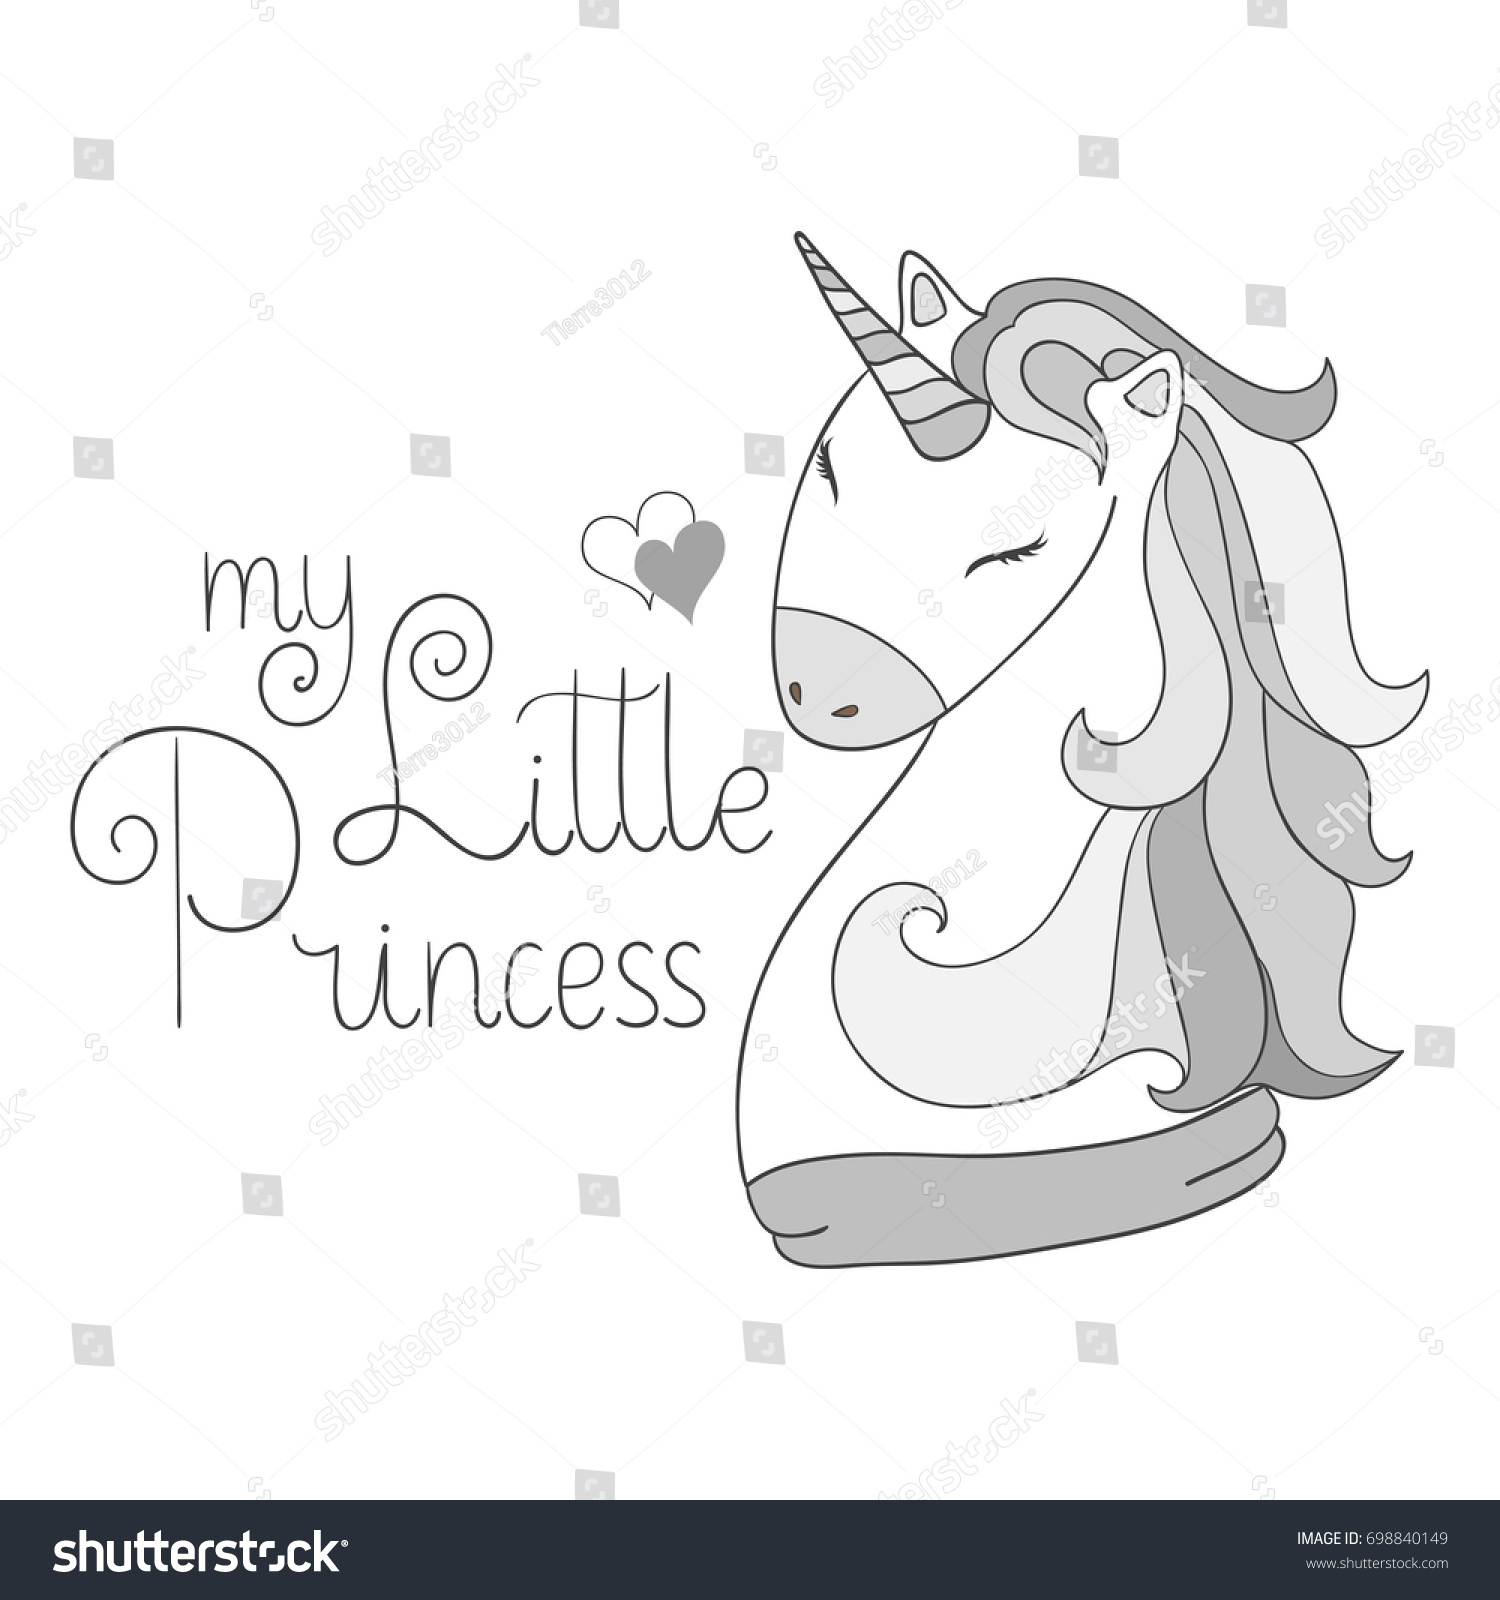 SVG of Magic cute baby unicorn, my little princess quote poster, greeting card, vector illustration with outline for kids print clothing textile and poster svg